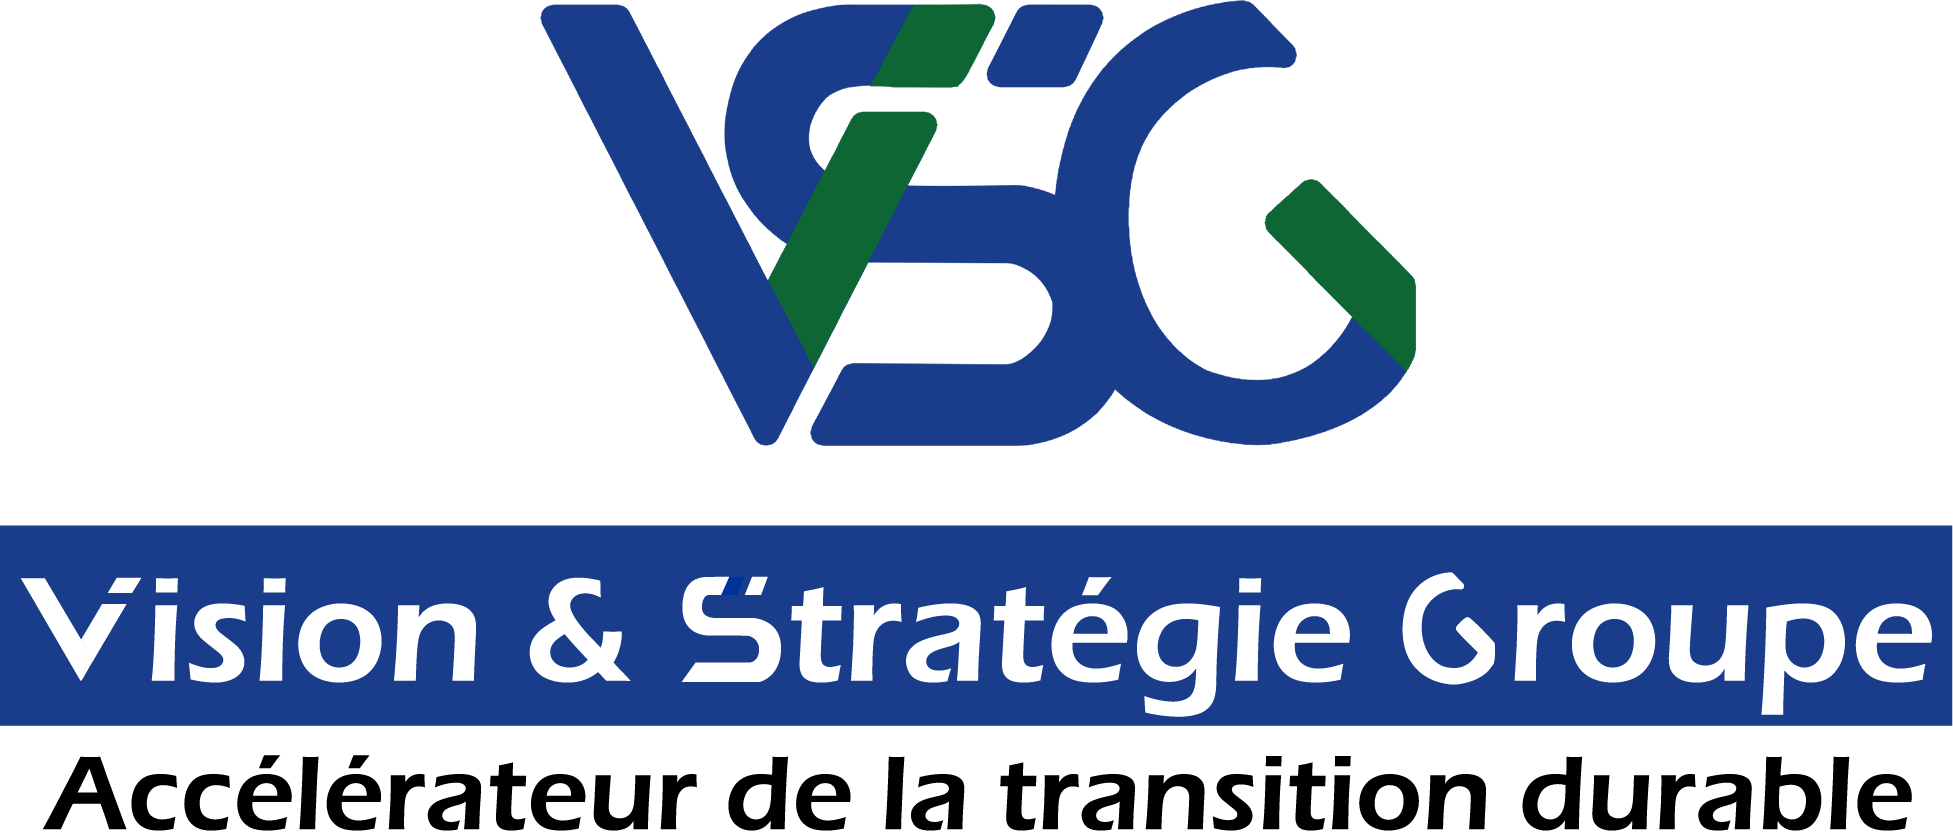 VISION & STRATEGIE GROUPE